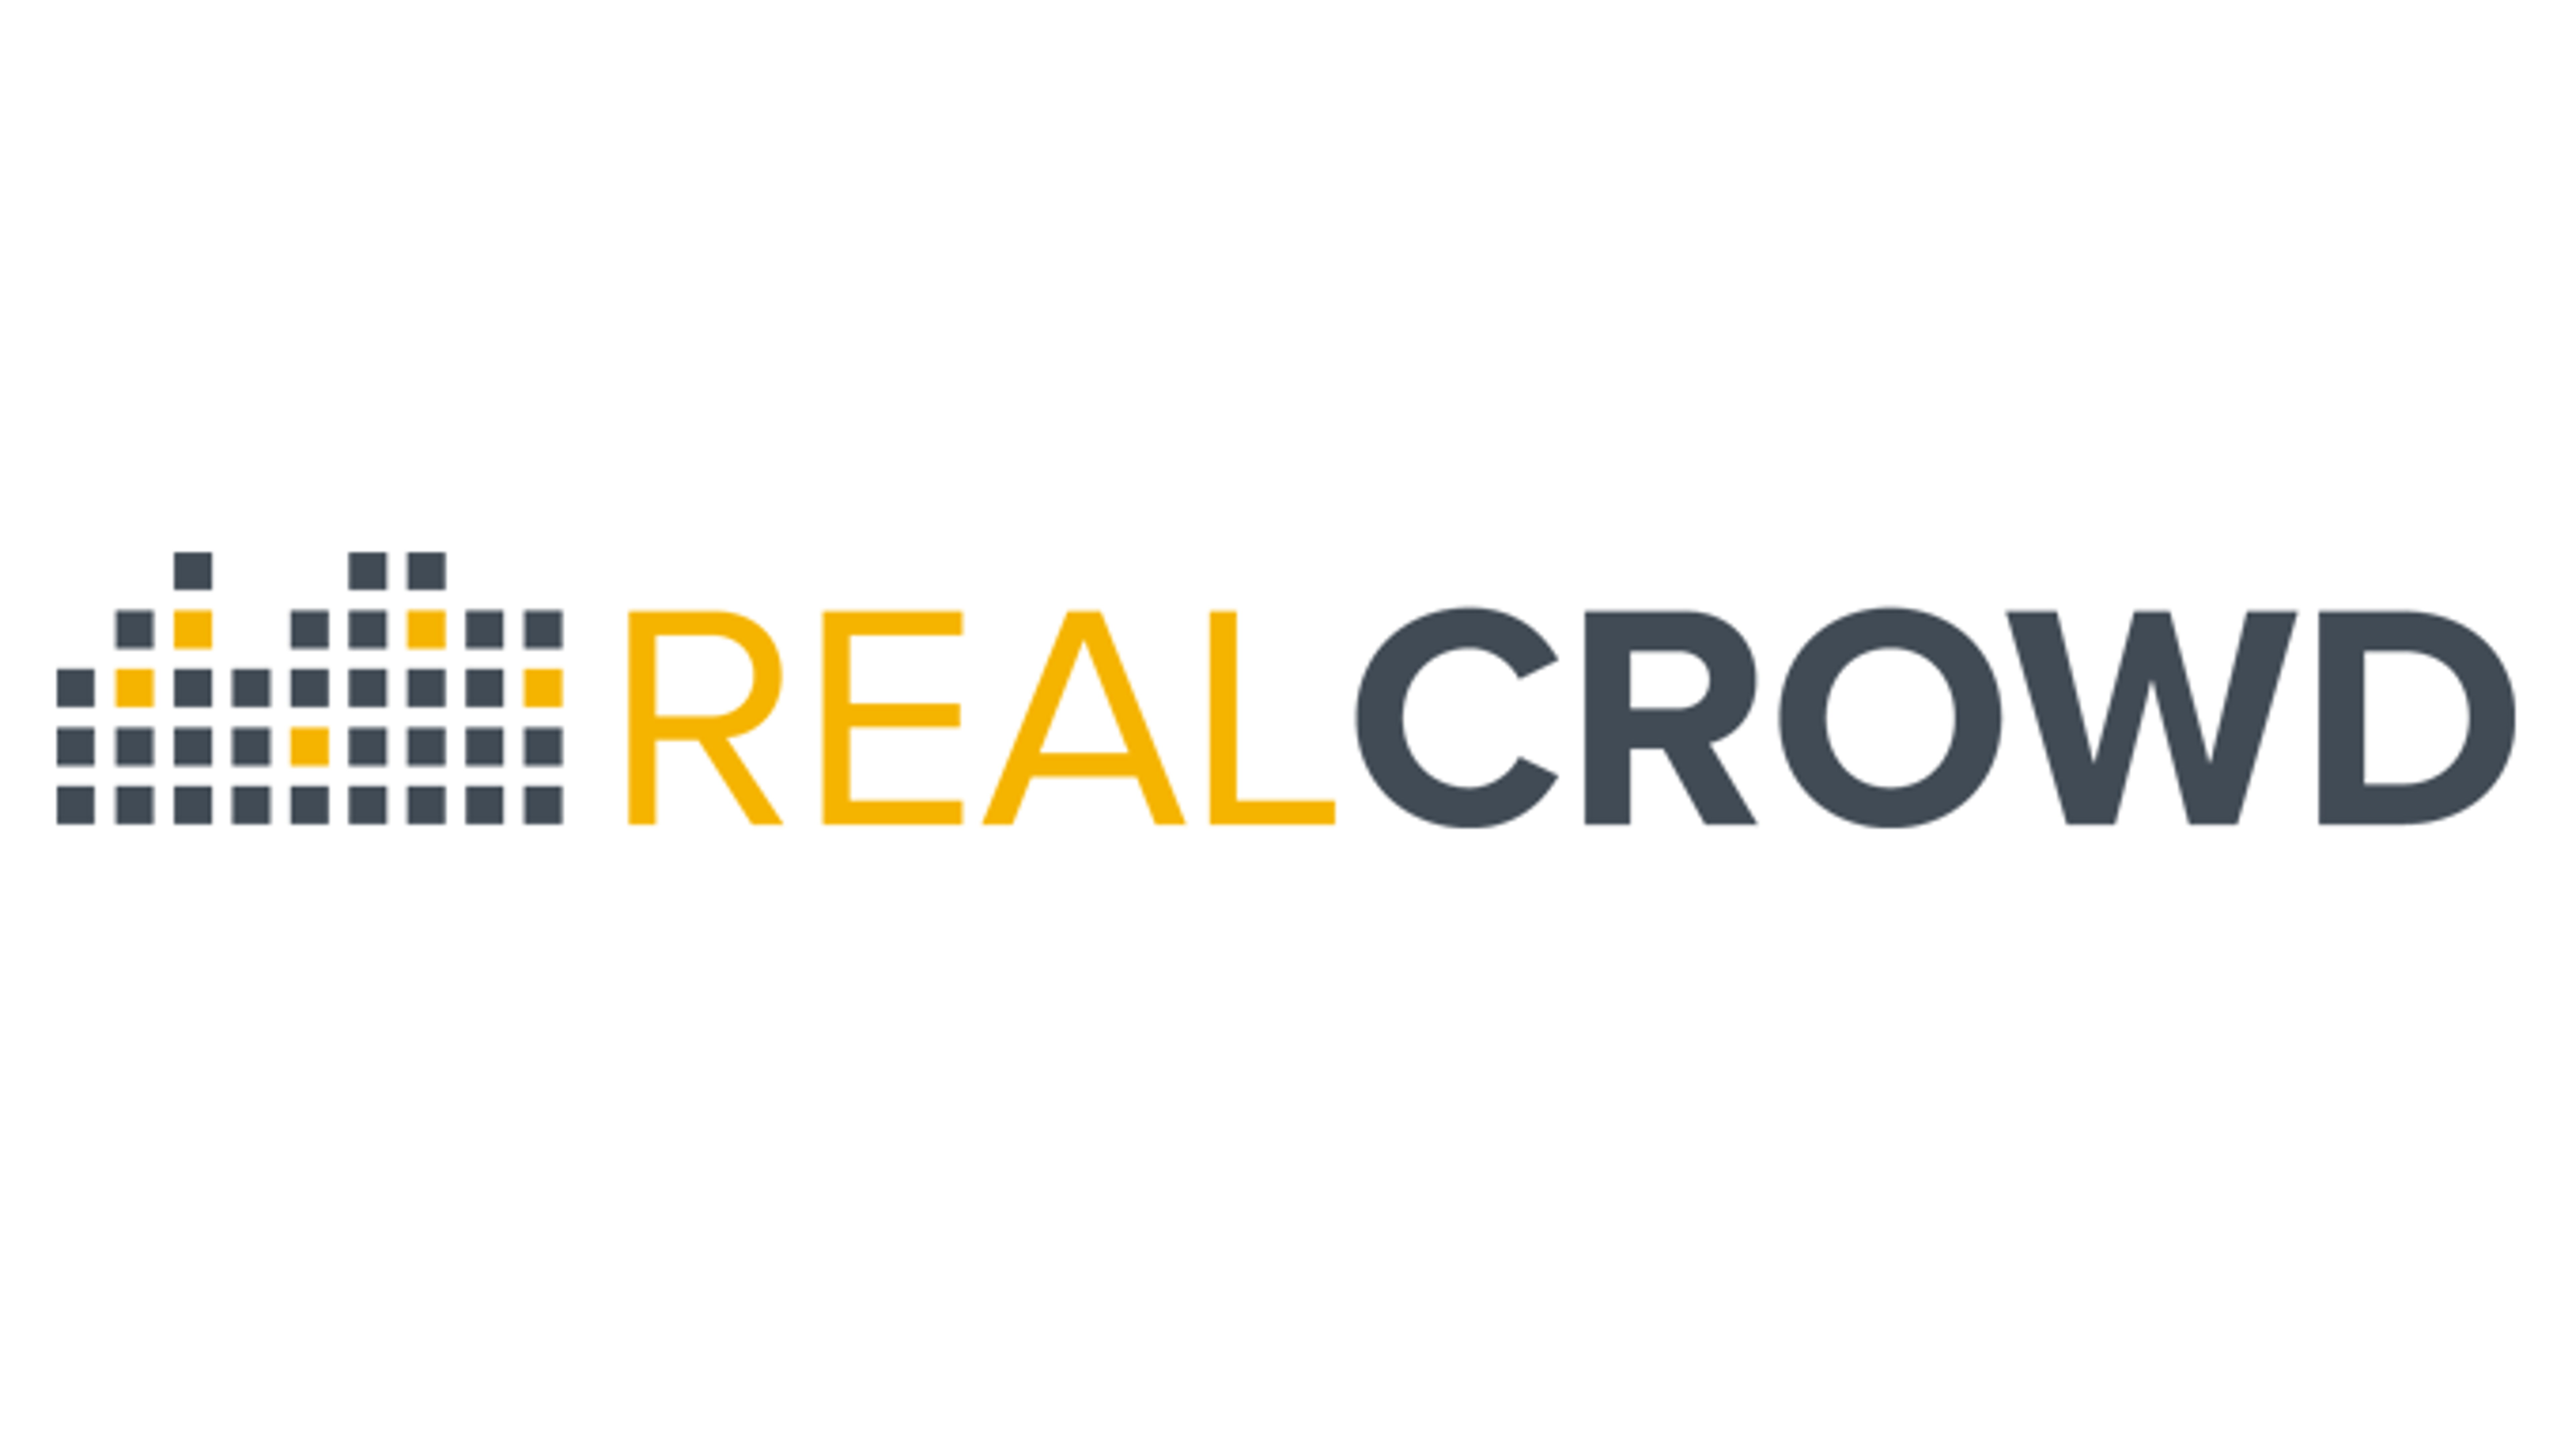 RealCrowd Online Investment Platform Review